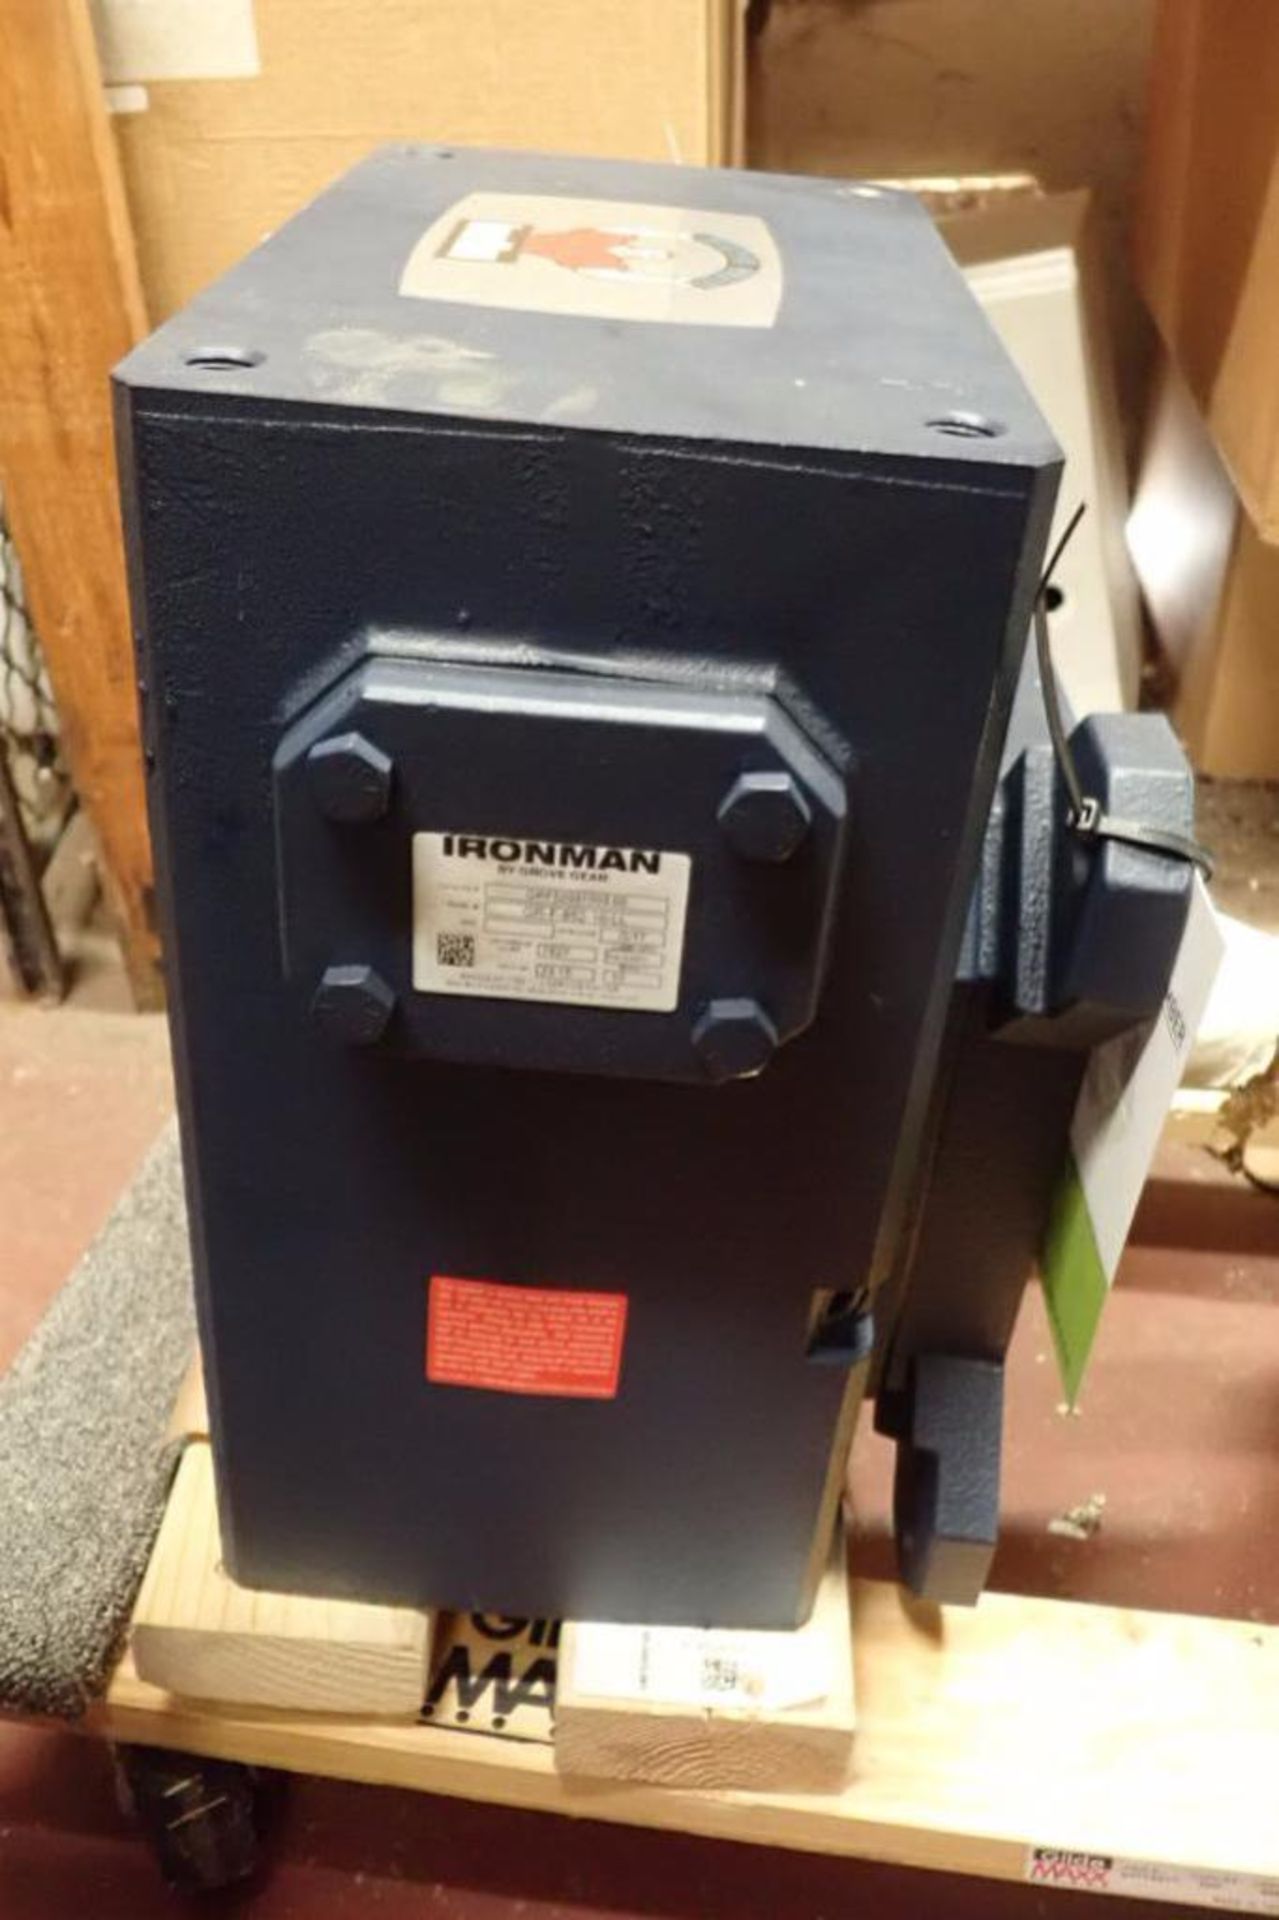 Unused Ironman grove gear, Model GR-F-852-10-LL, ration 10:1 ** Rigging Fee: $10 ** - Image 5 of 5